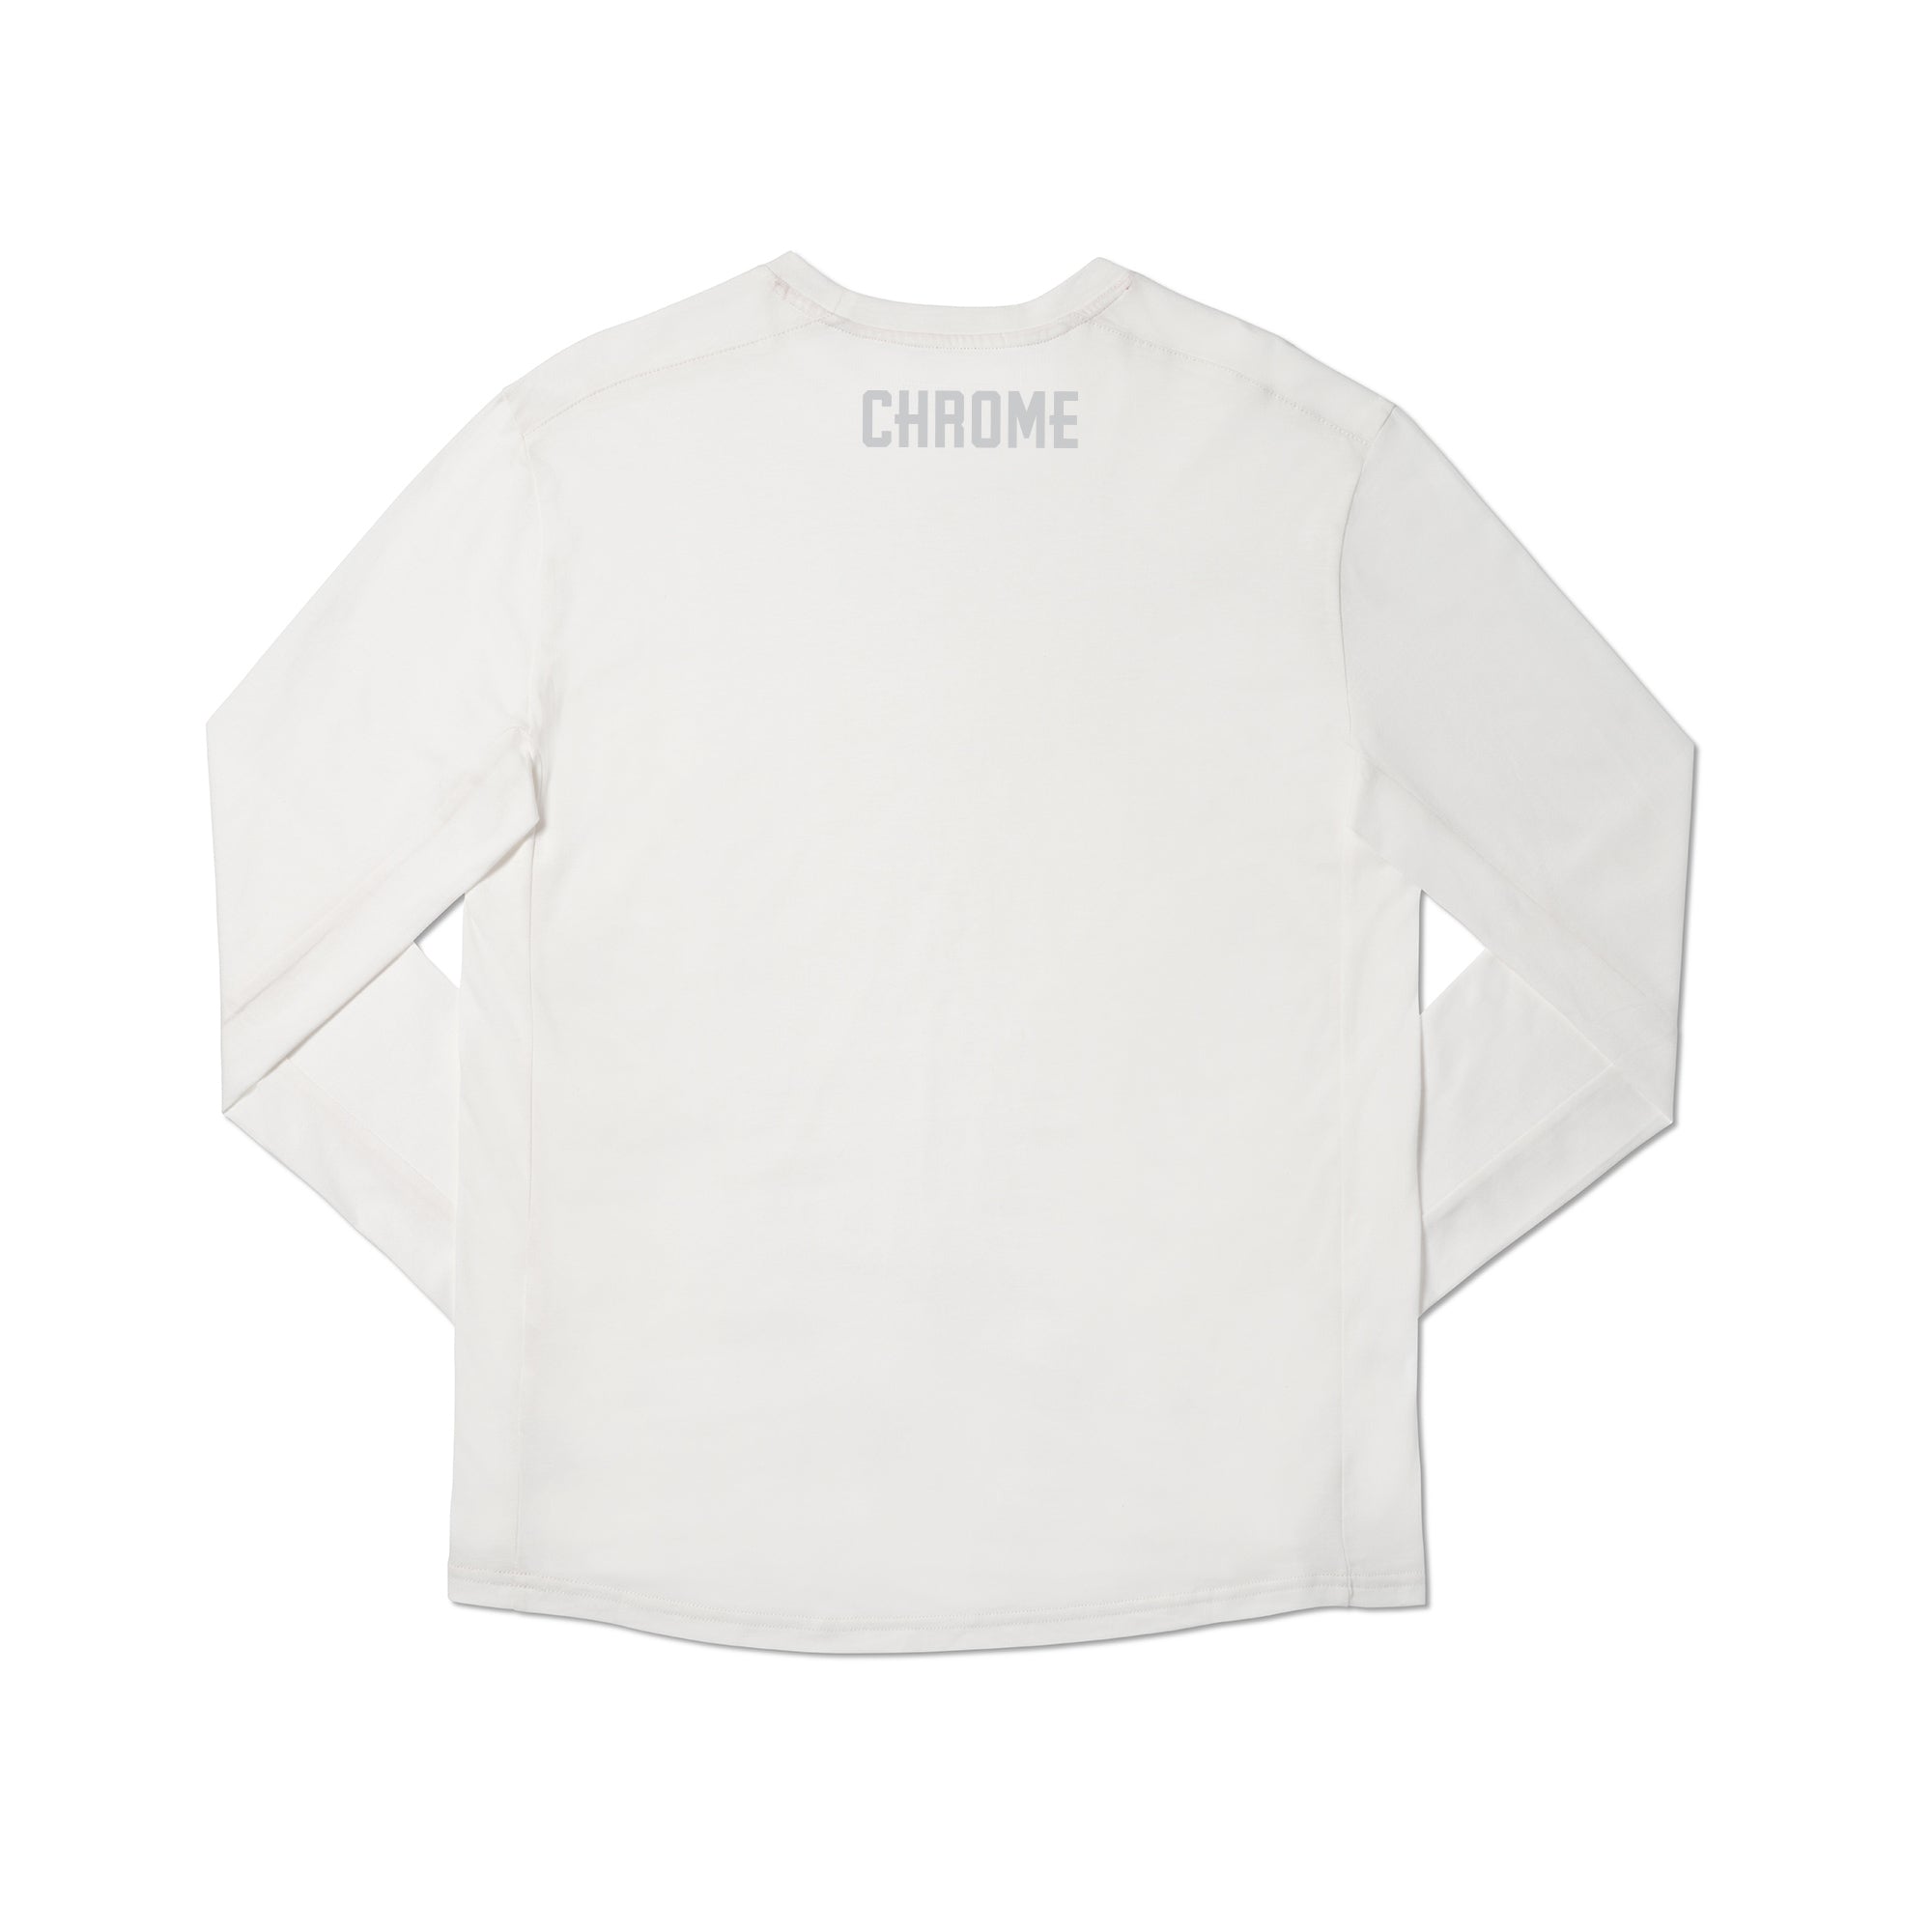 Chrome checkerboard logo tee long sleeve in white back of tee #color_white